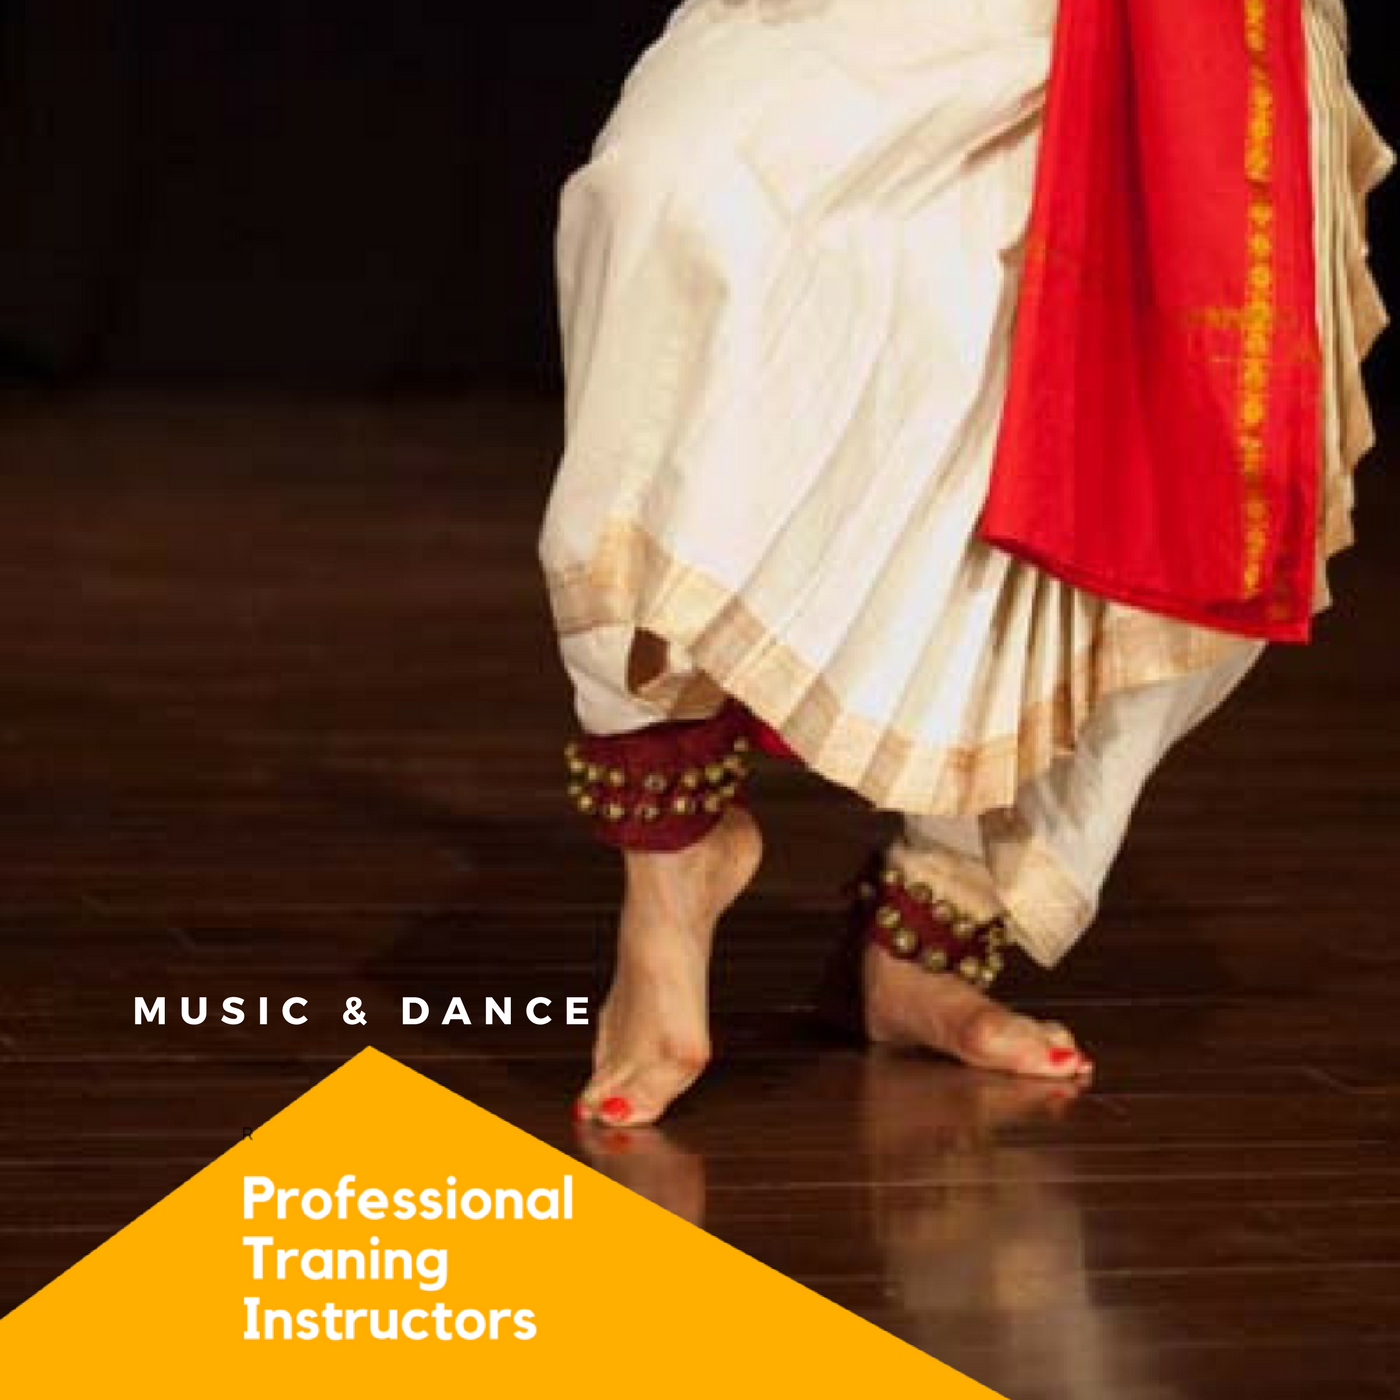 learn-online-private-classes-for-music-dance-drama-bollywood-acting-gaalc-delhi-india